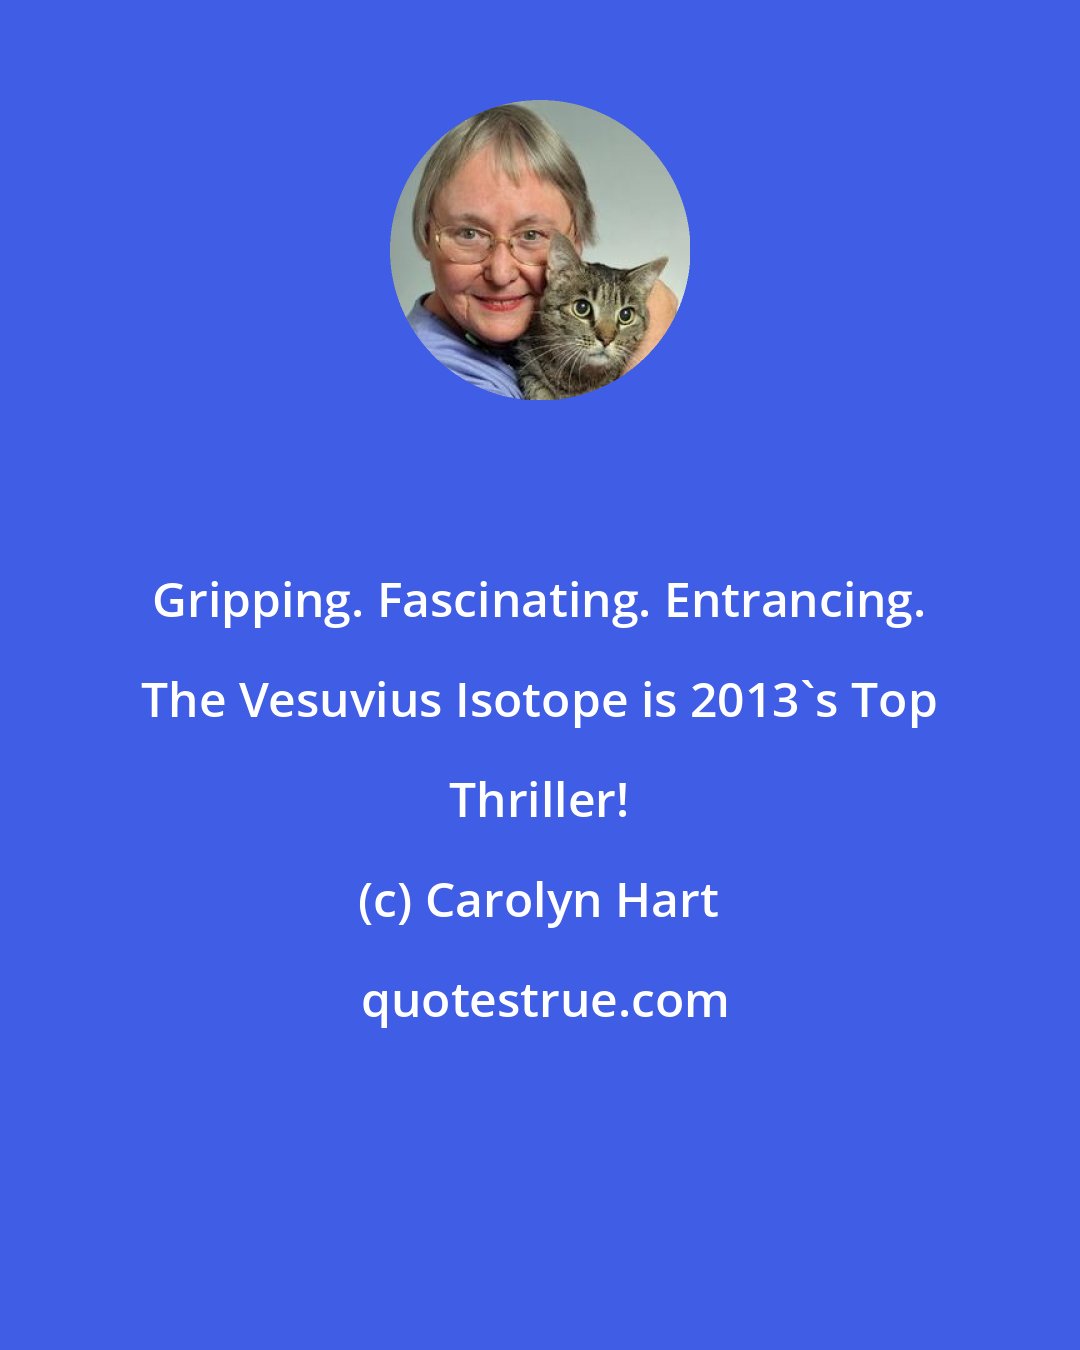 Carolyn Hart: Gripping. Fascinating. Entrancing. The Vesuvius Isotope is 2013's Top Thriller!